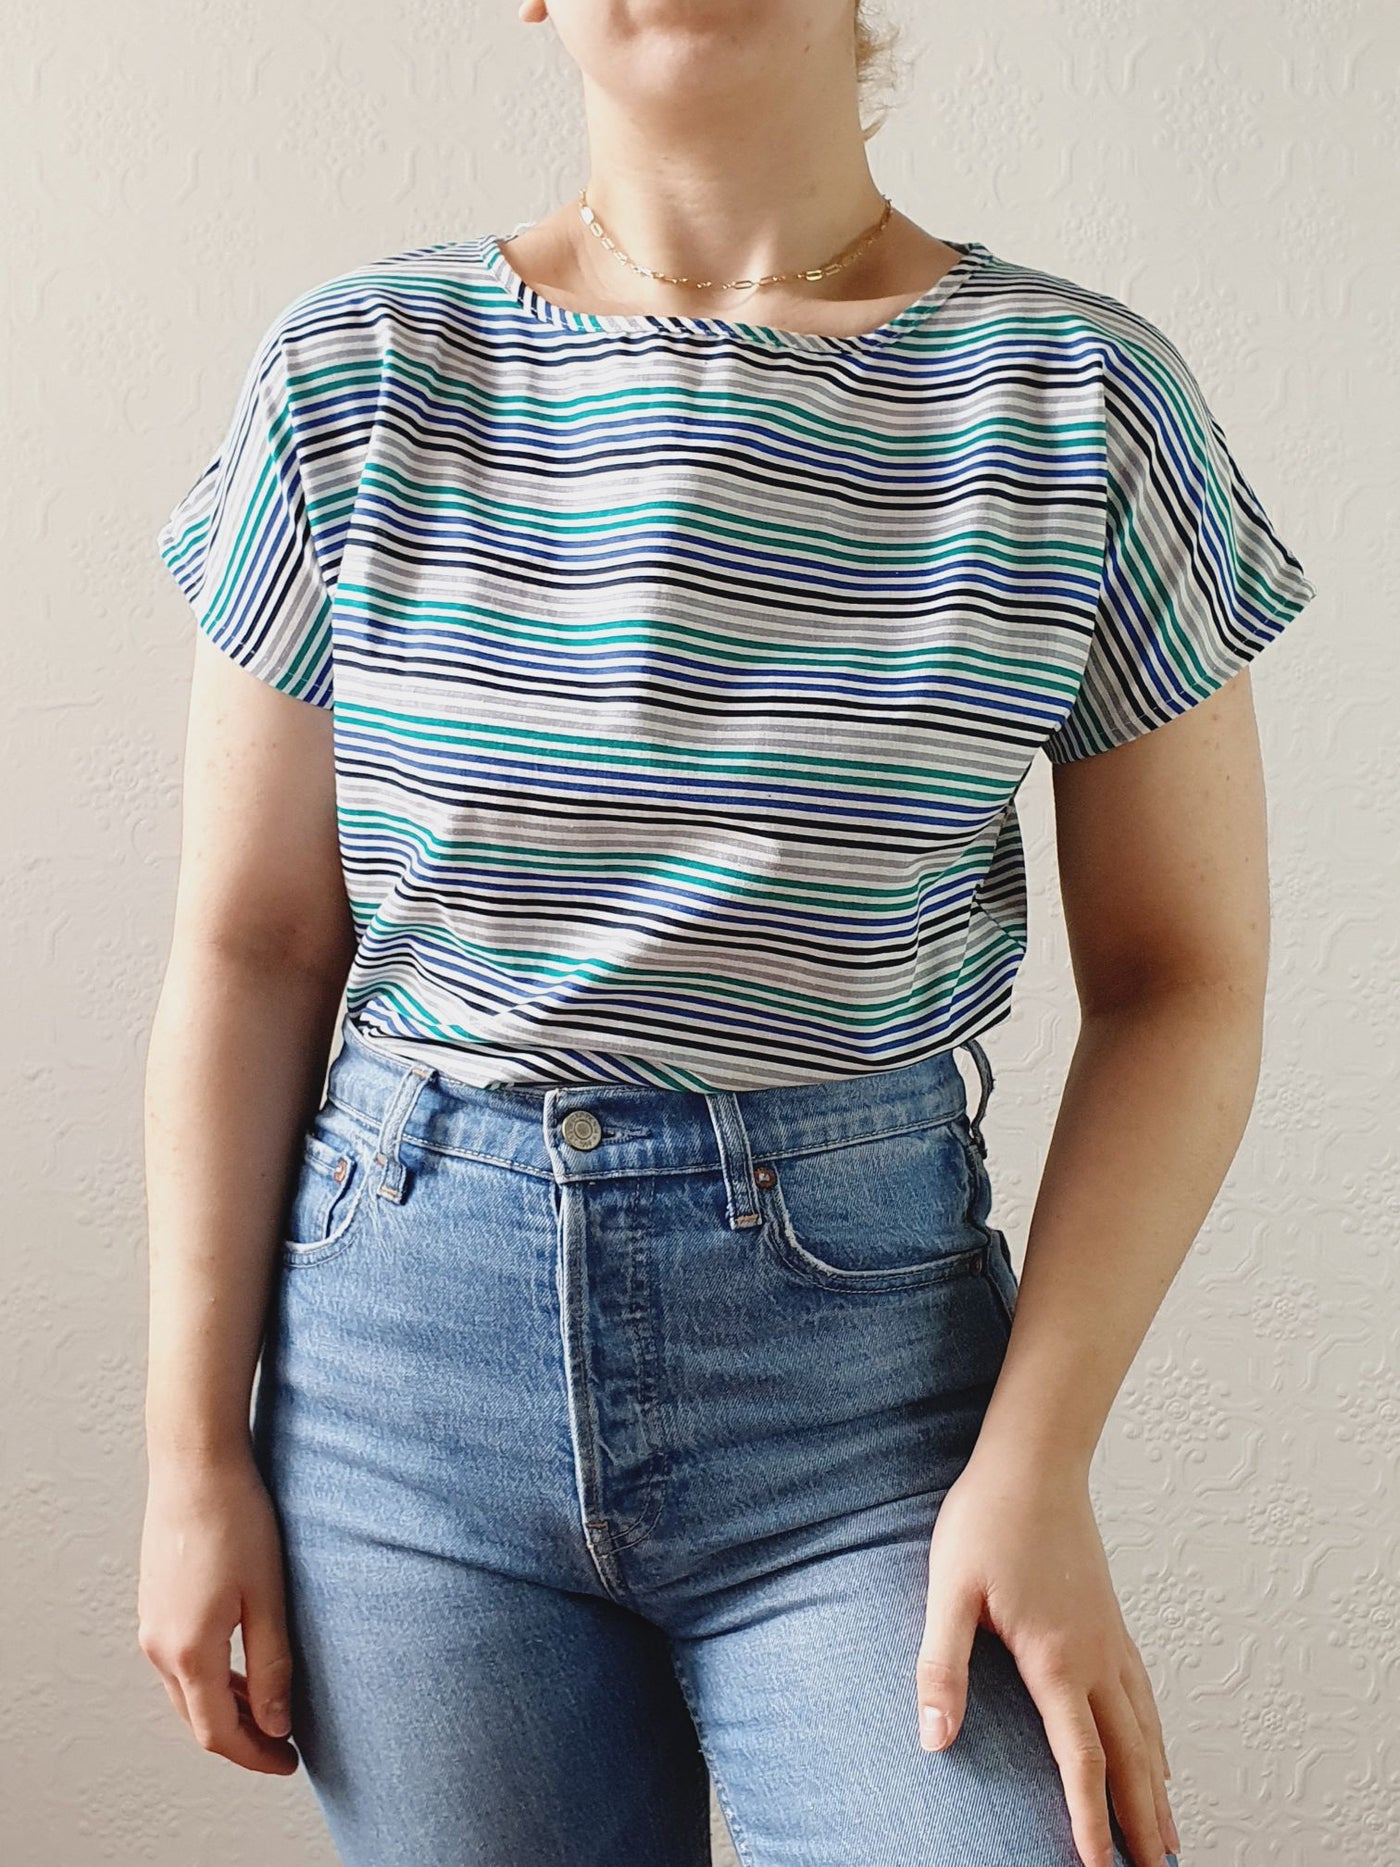 Vintage 80s Blue & Green Striped Tee with Batwing Short Sleeves - S